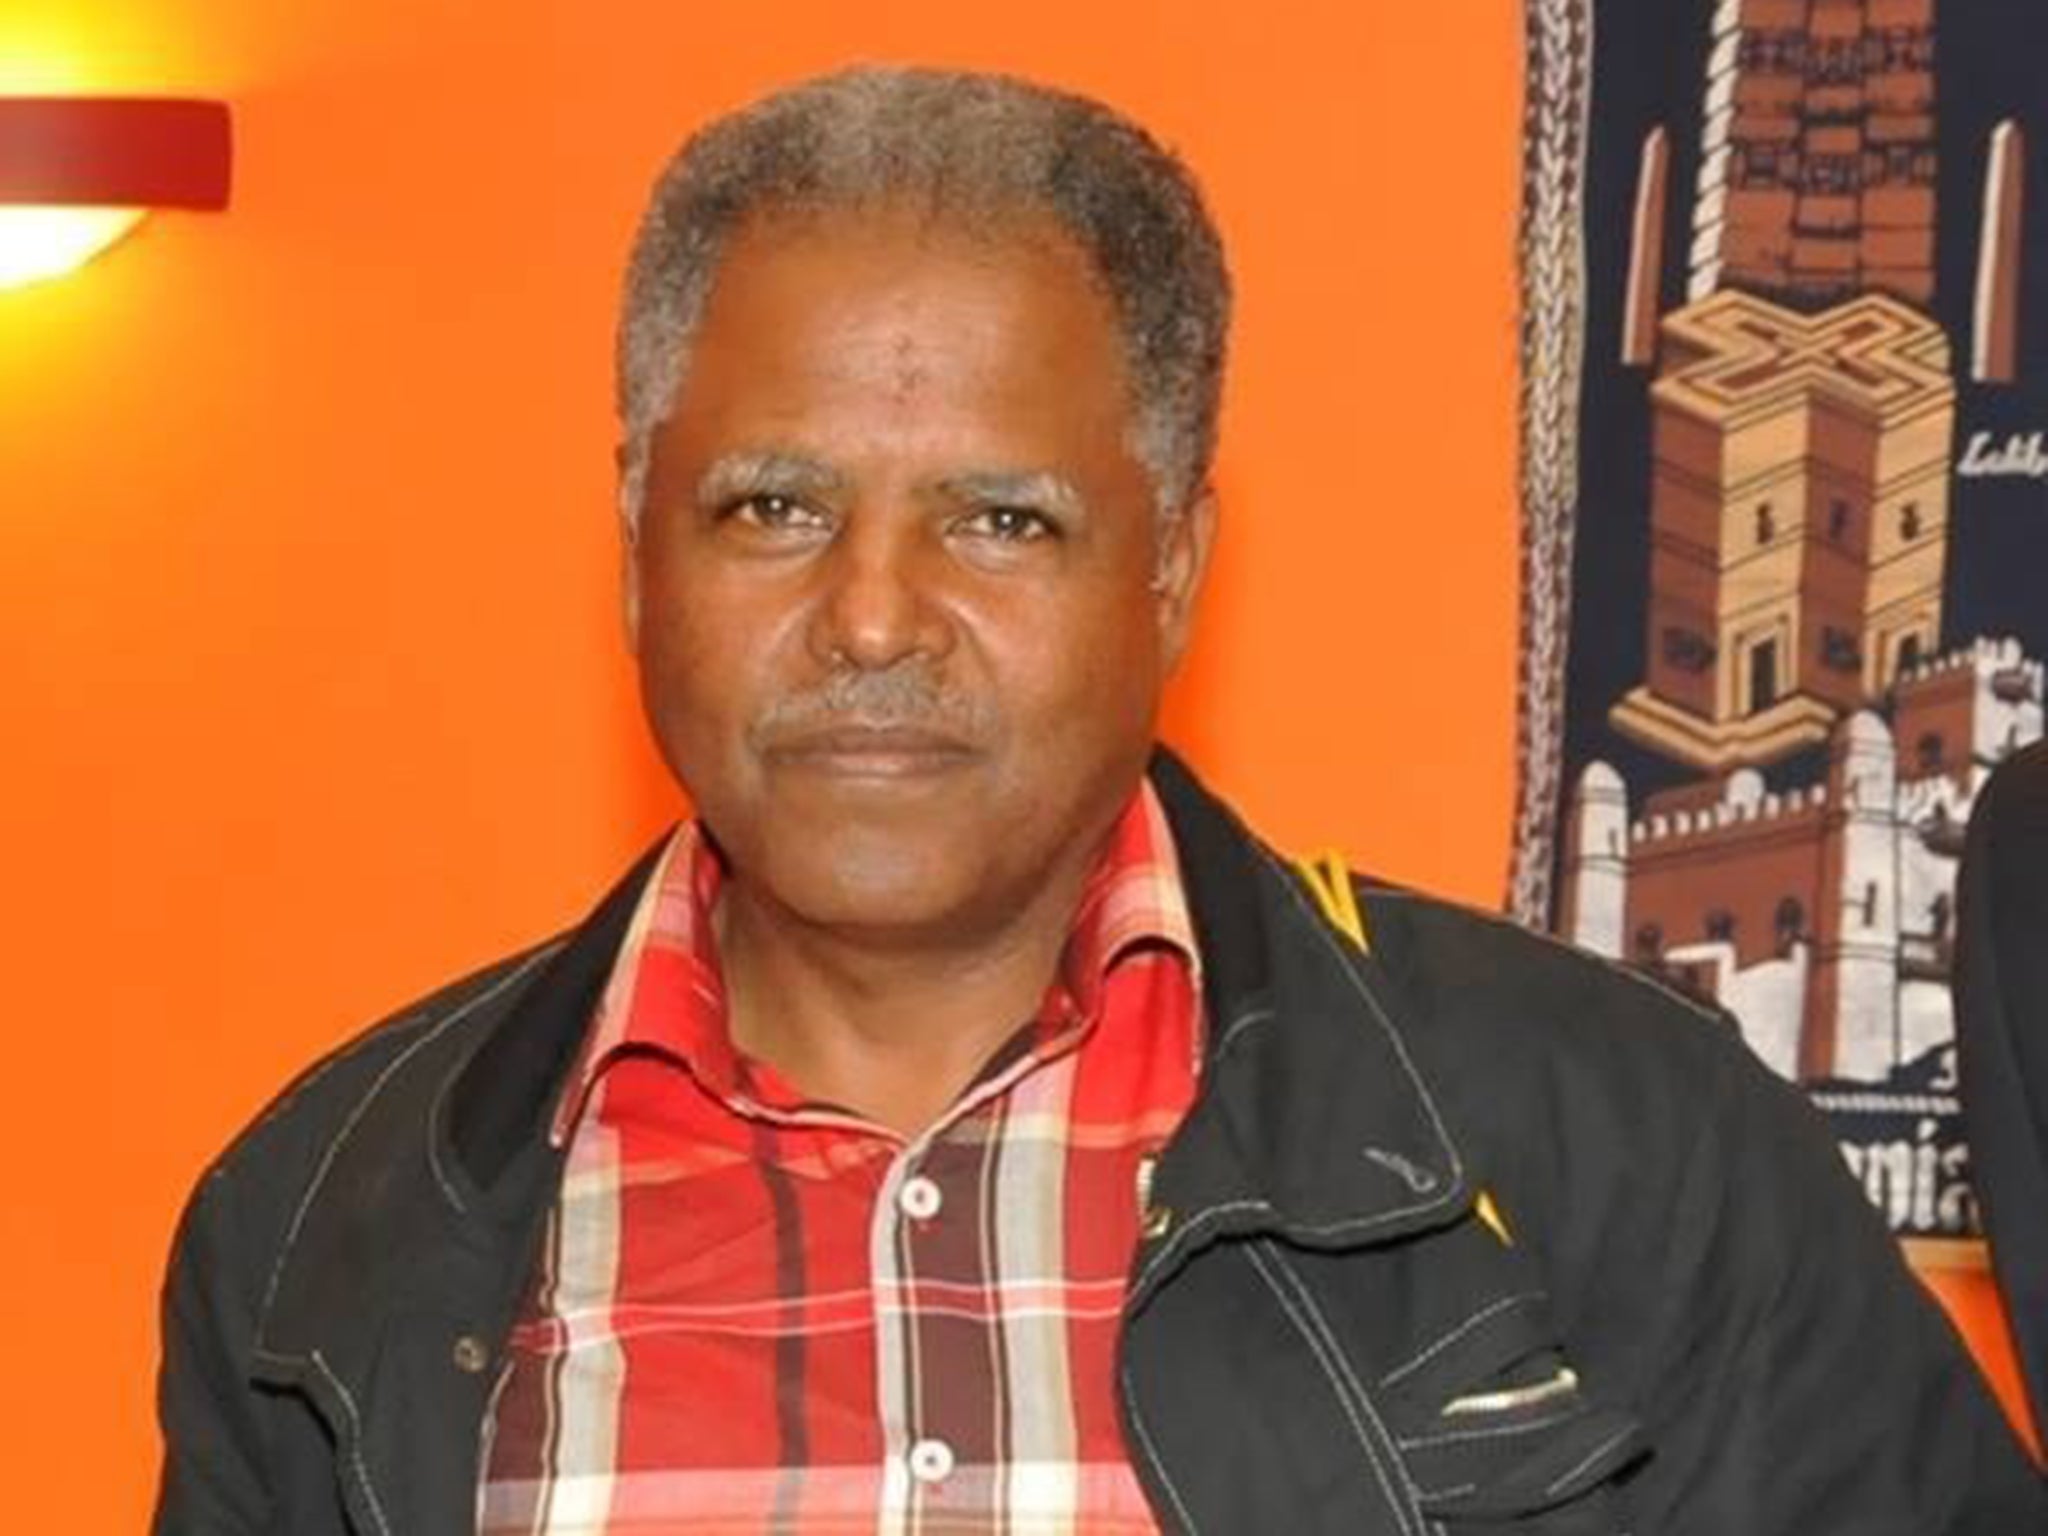 Andargachew “Andy” Tsege from London was seized at an airport in Yemen in June